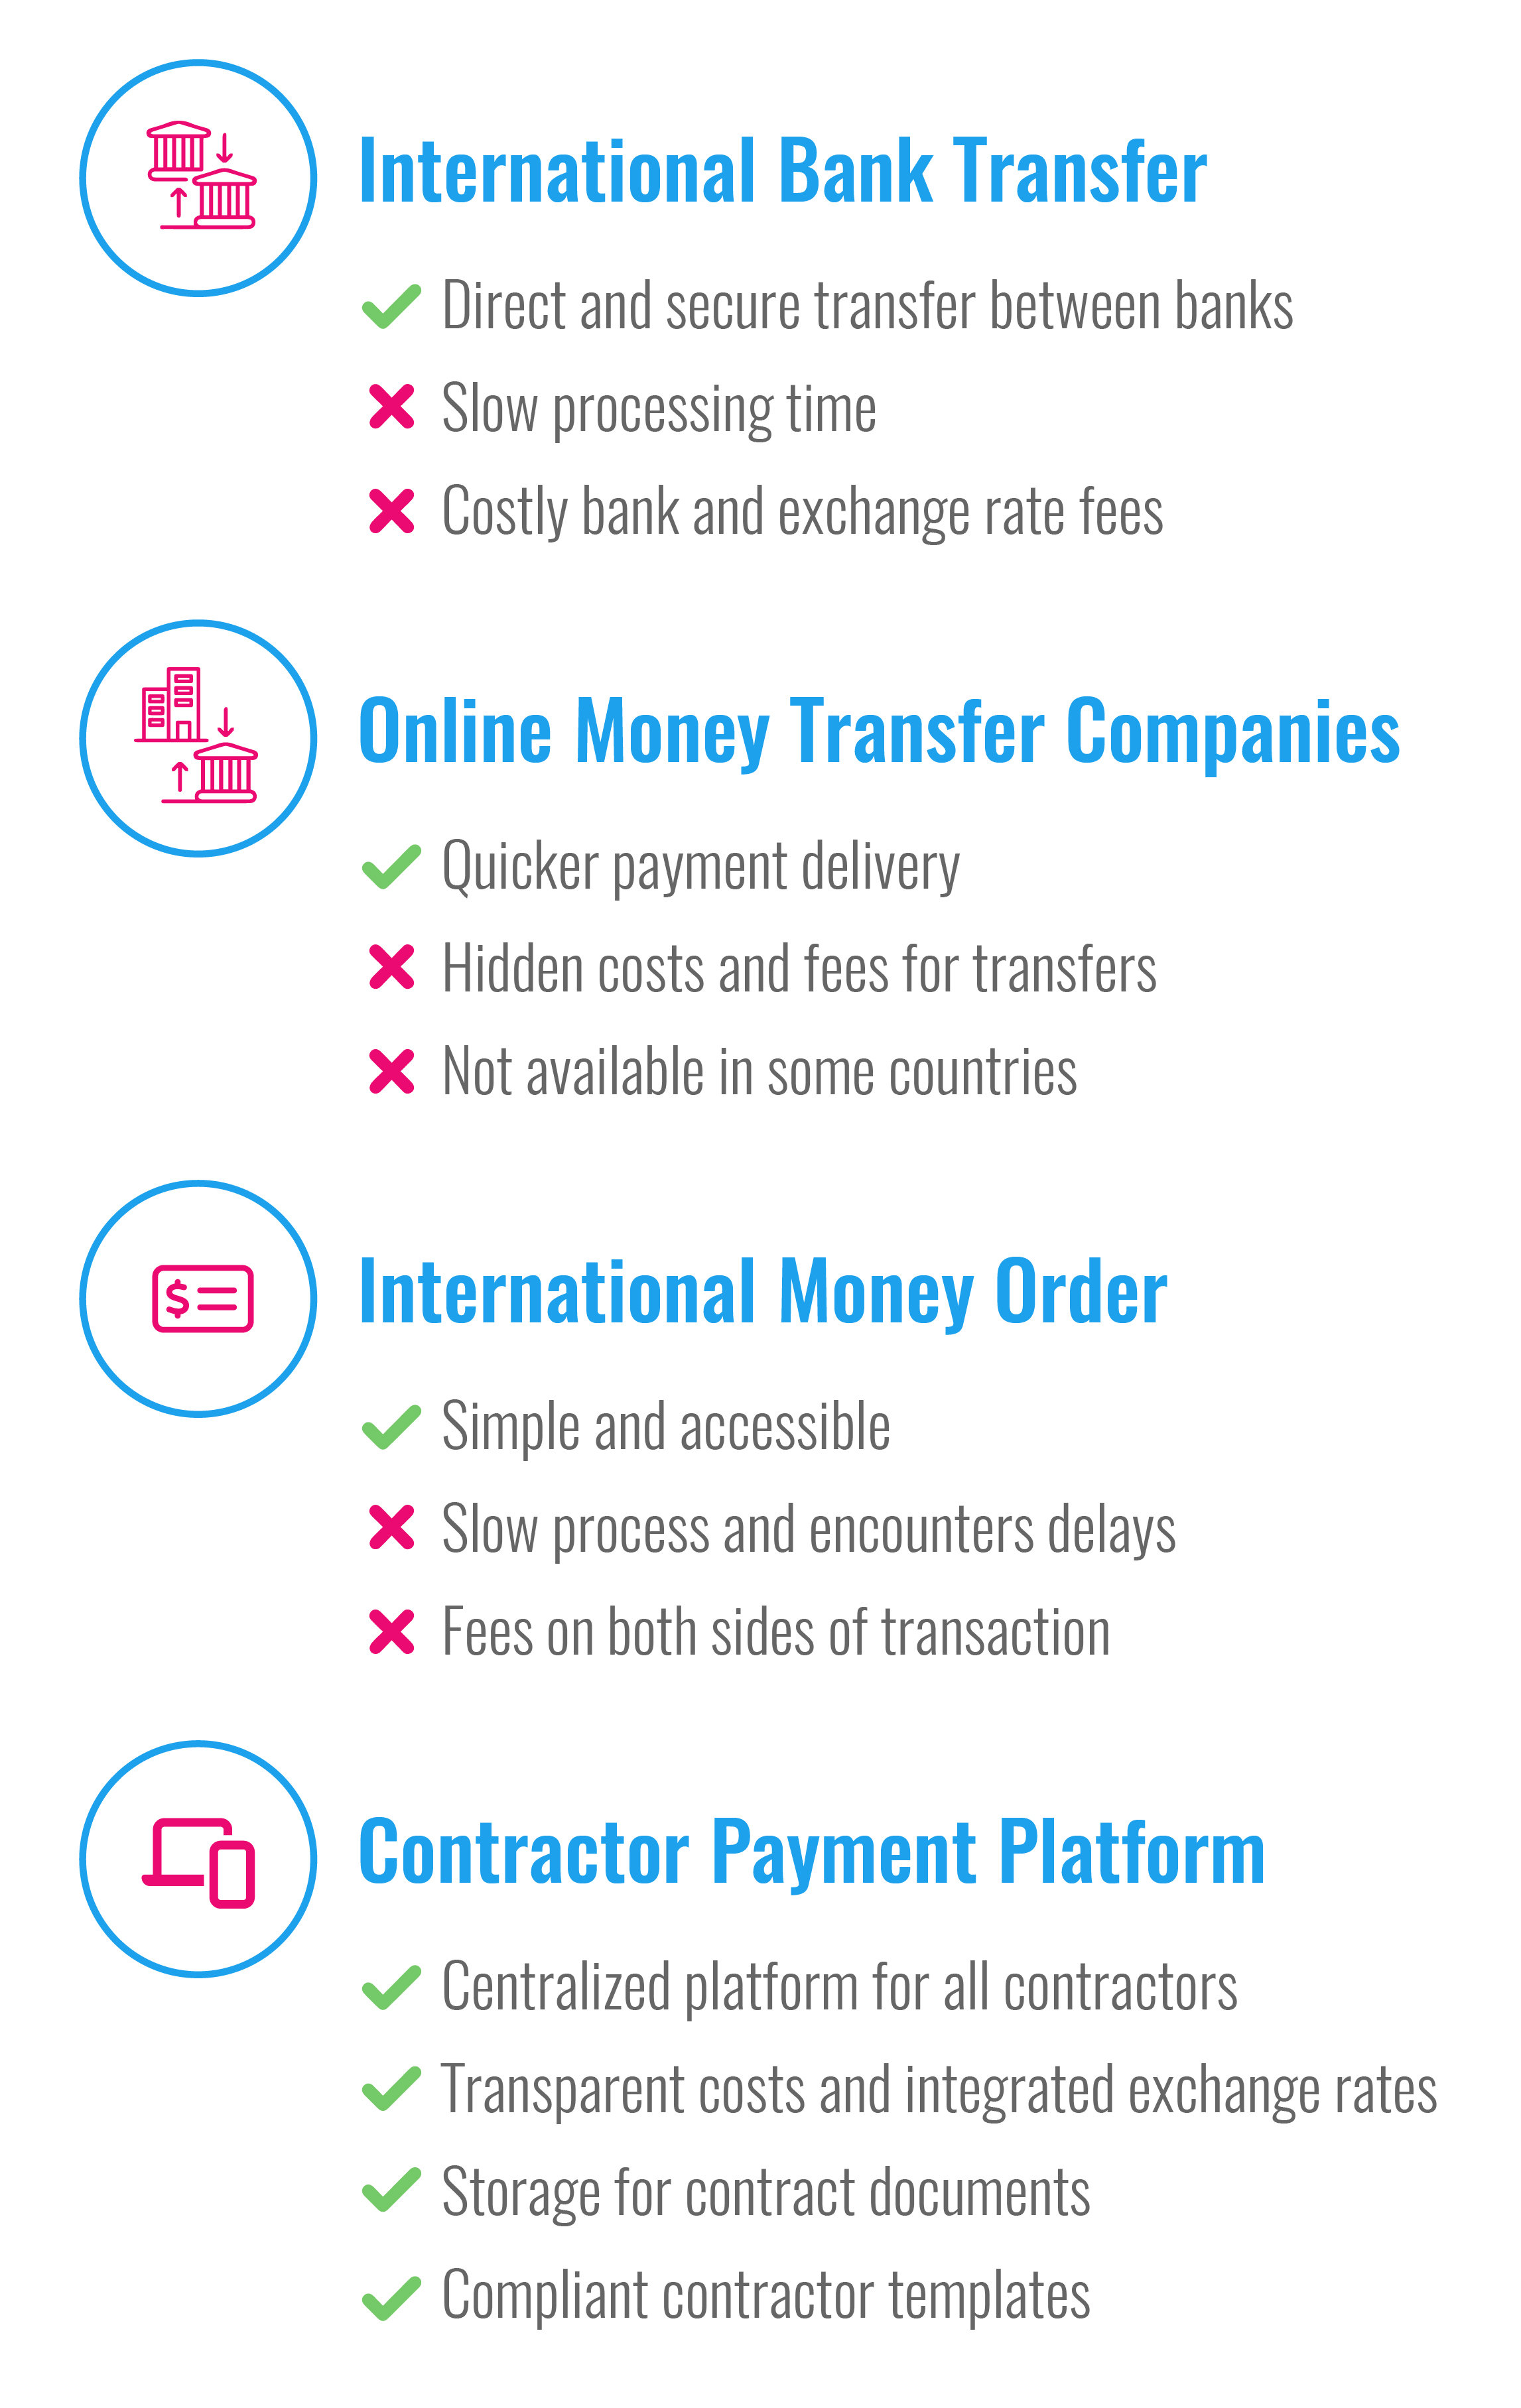 Infographic describing the benefits and drawbacks of four international payment methods that employers can use to pay contractors overseas.